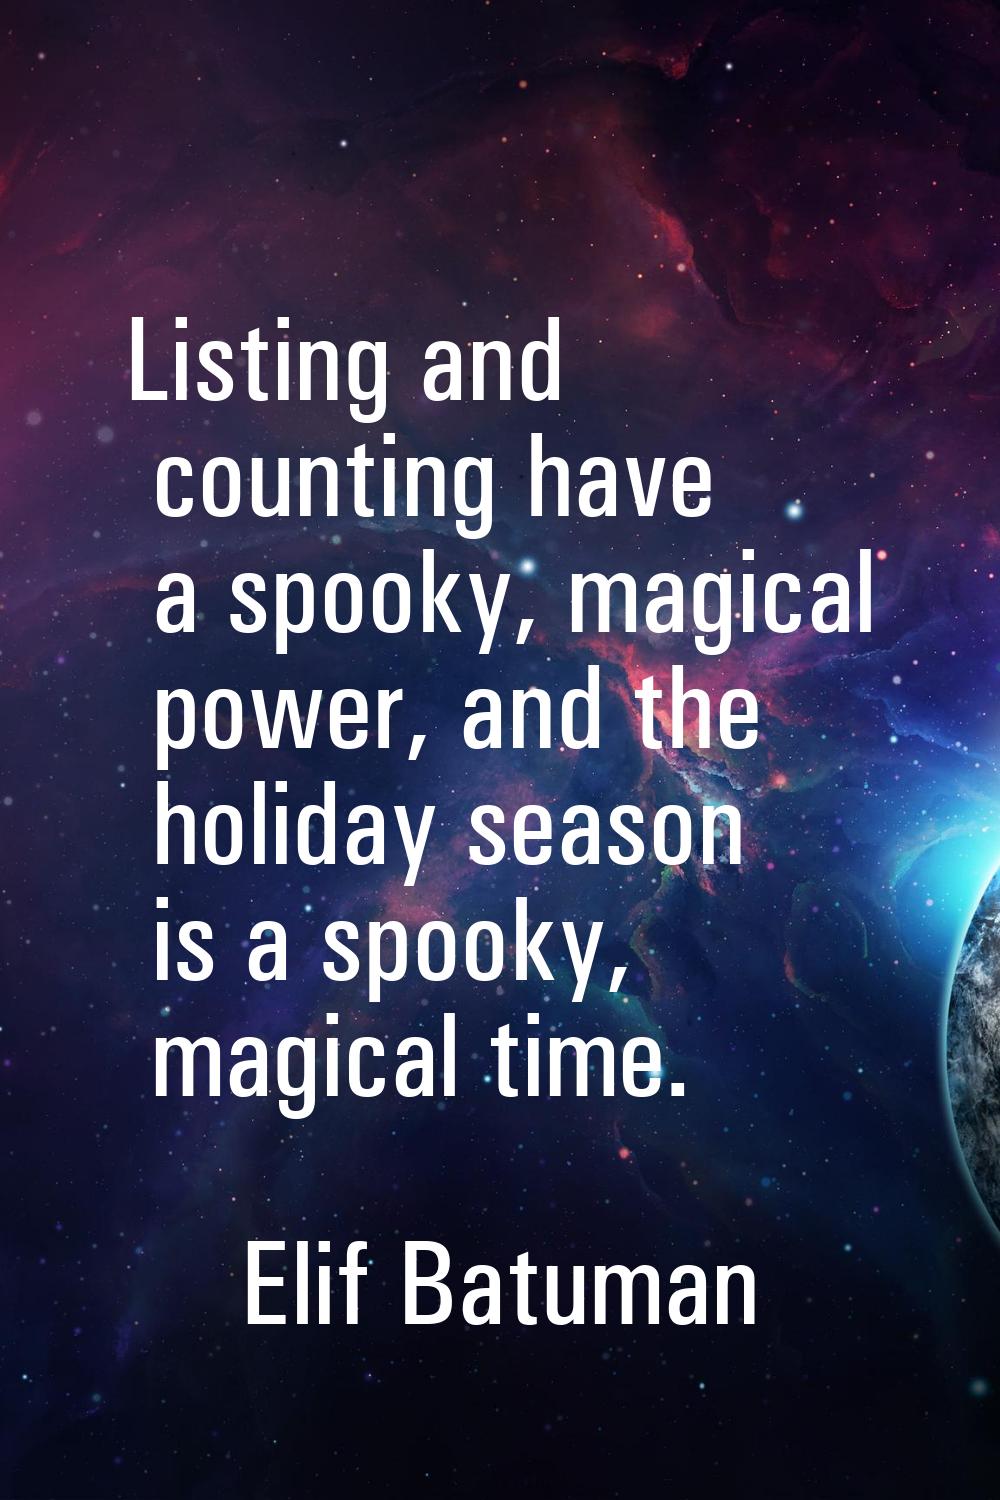 Listing and counting have a spooky, magical power, and the holiday season is a spooky, magical time